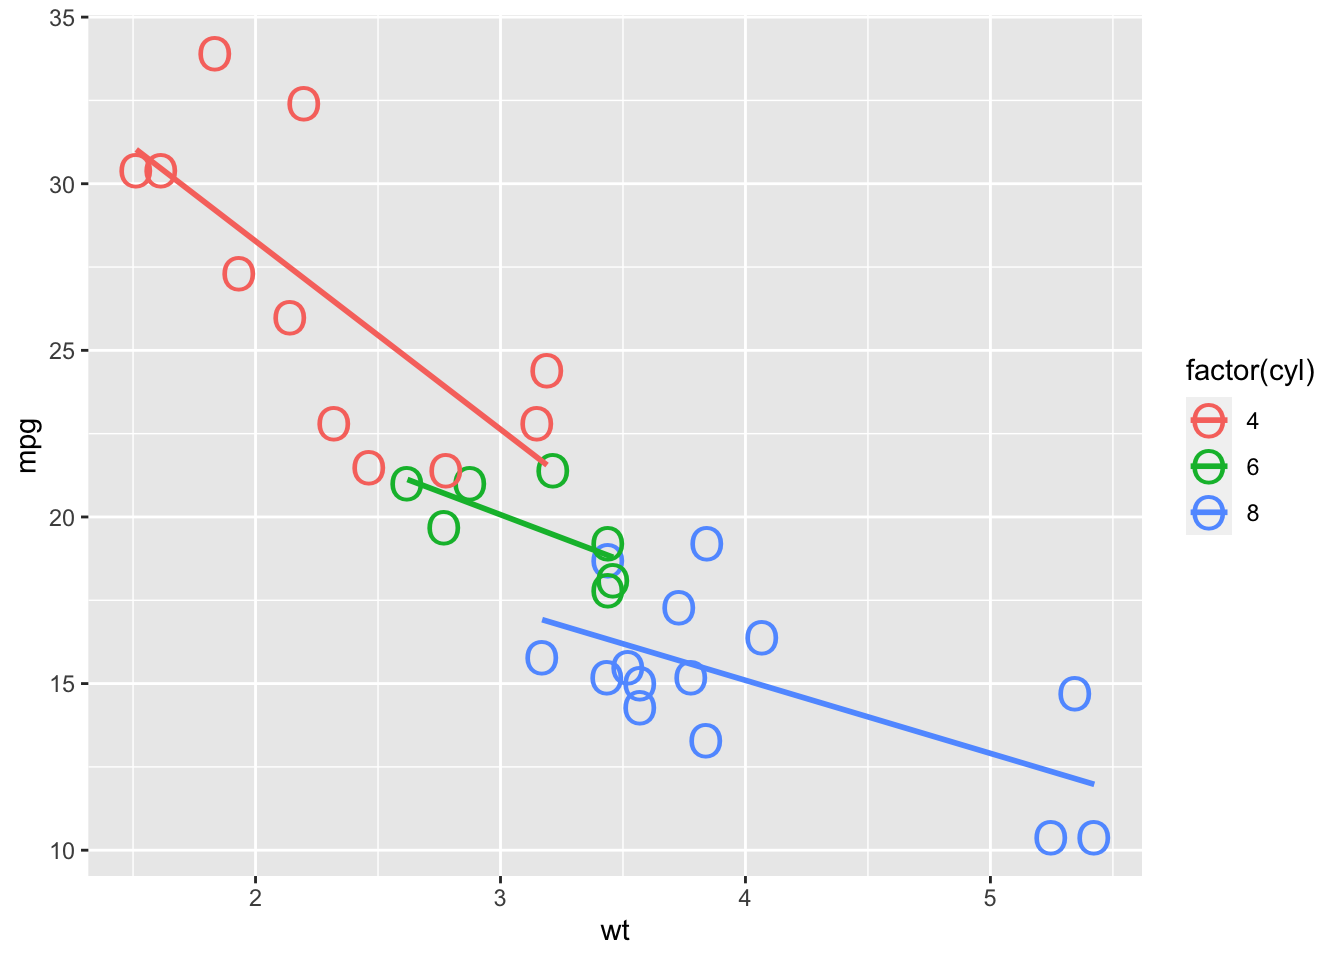 Figure: Scatterplot Shape o with size 6